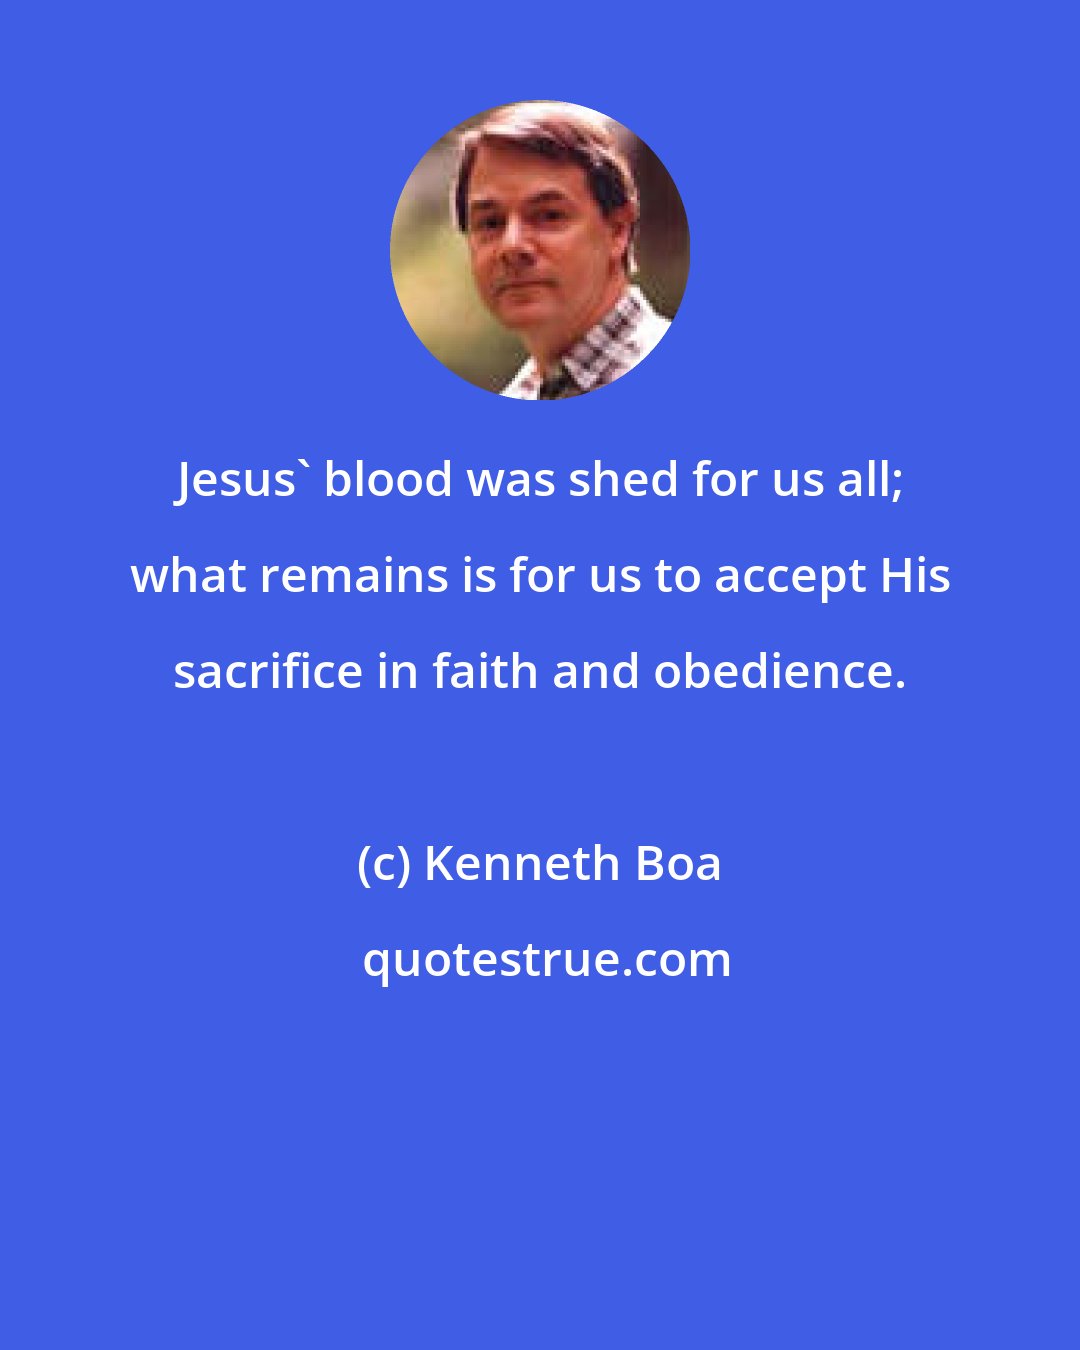 Kenneth Boa: Jesus' blood was shed for us all; what remains is for us to accept His sacrifice in faith and obedience.